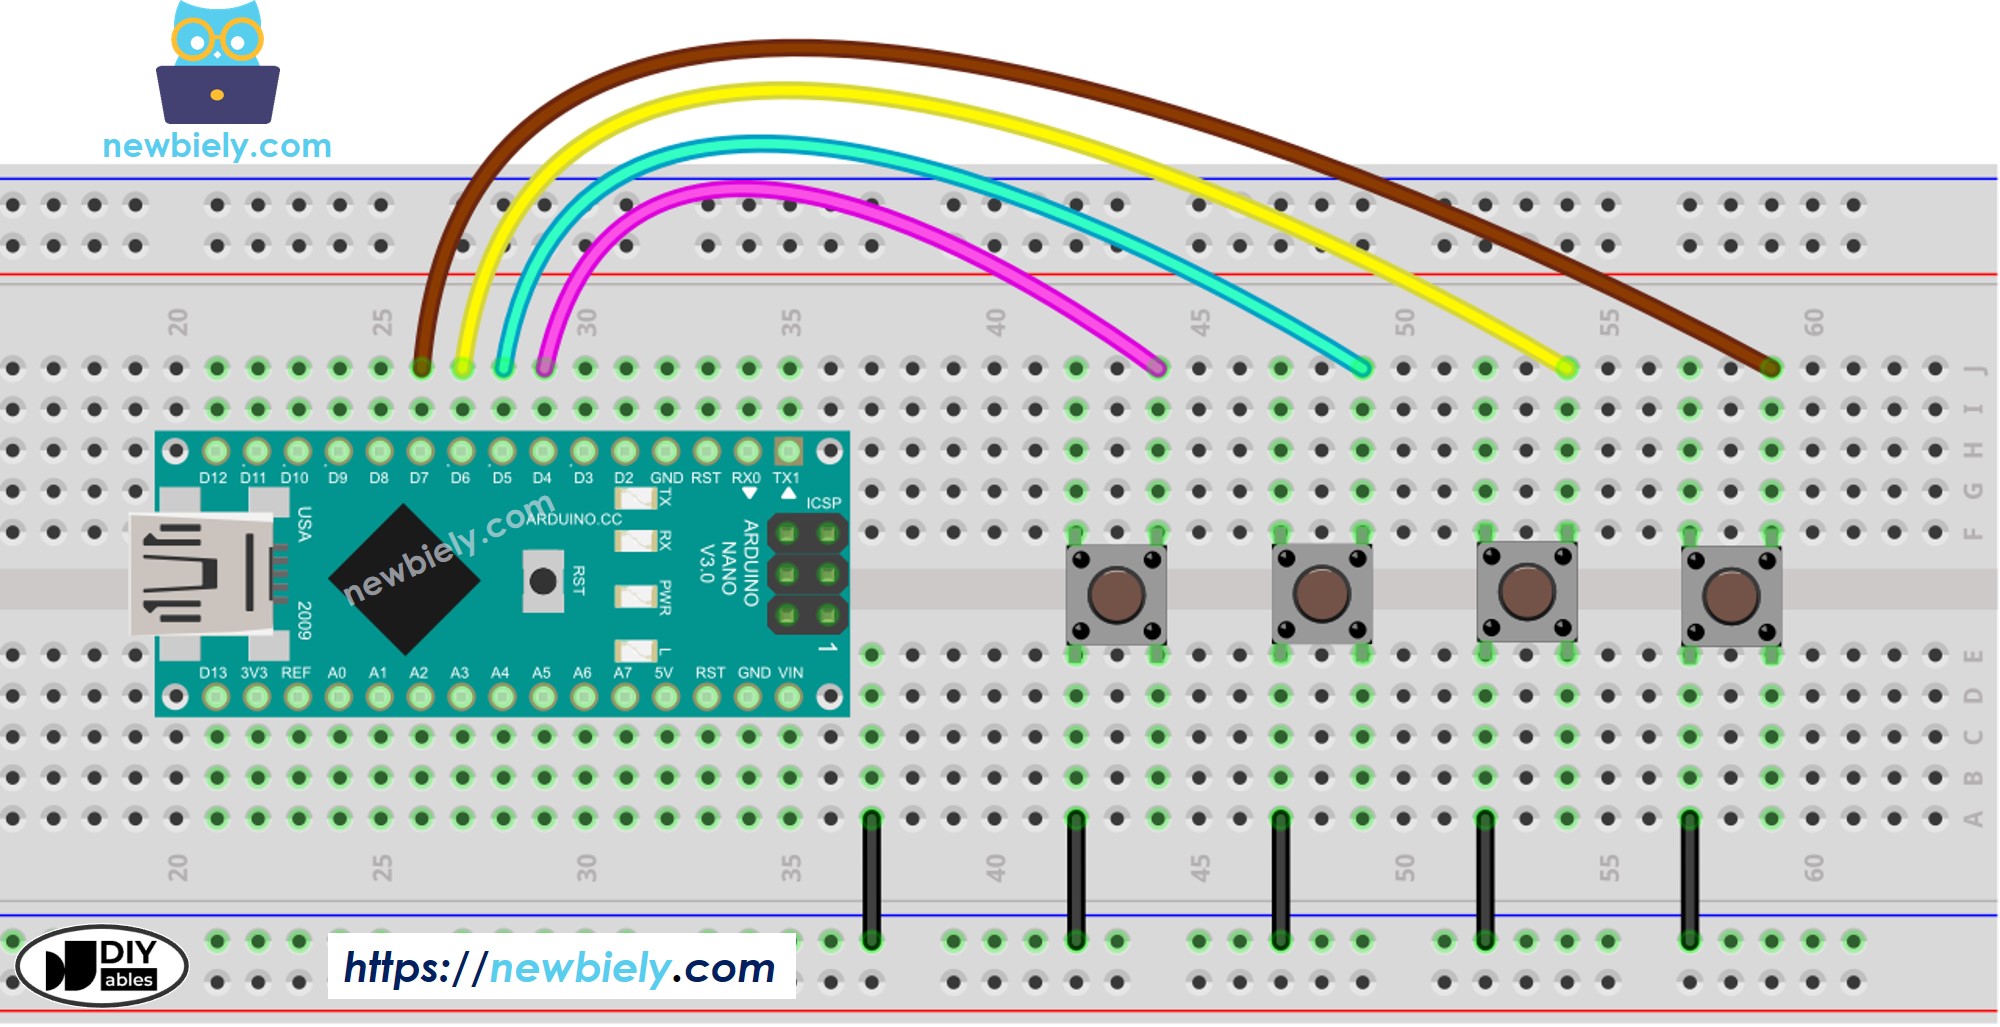 The wiring diagram between Arduino Nano and multiple button